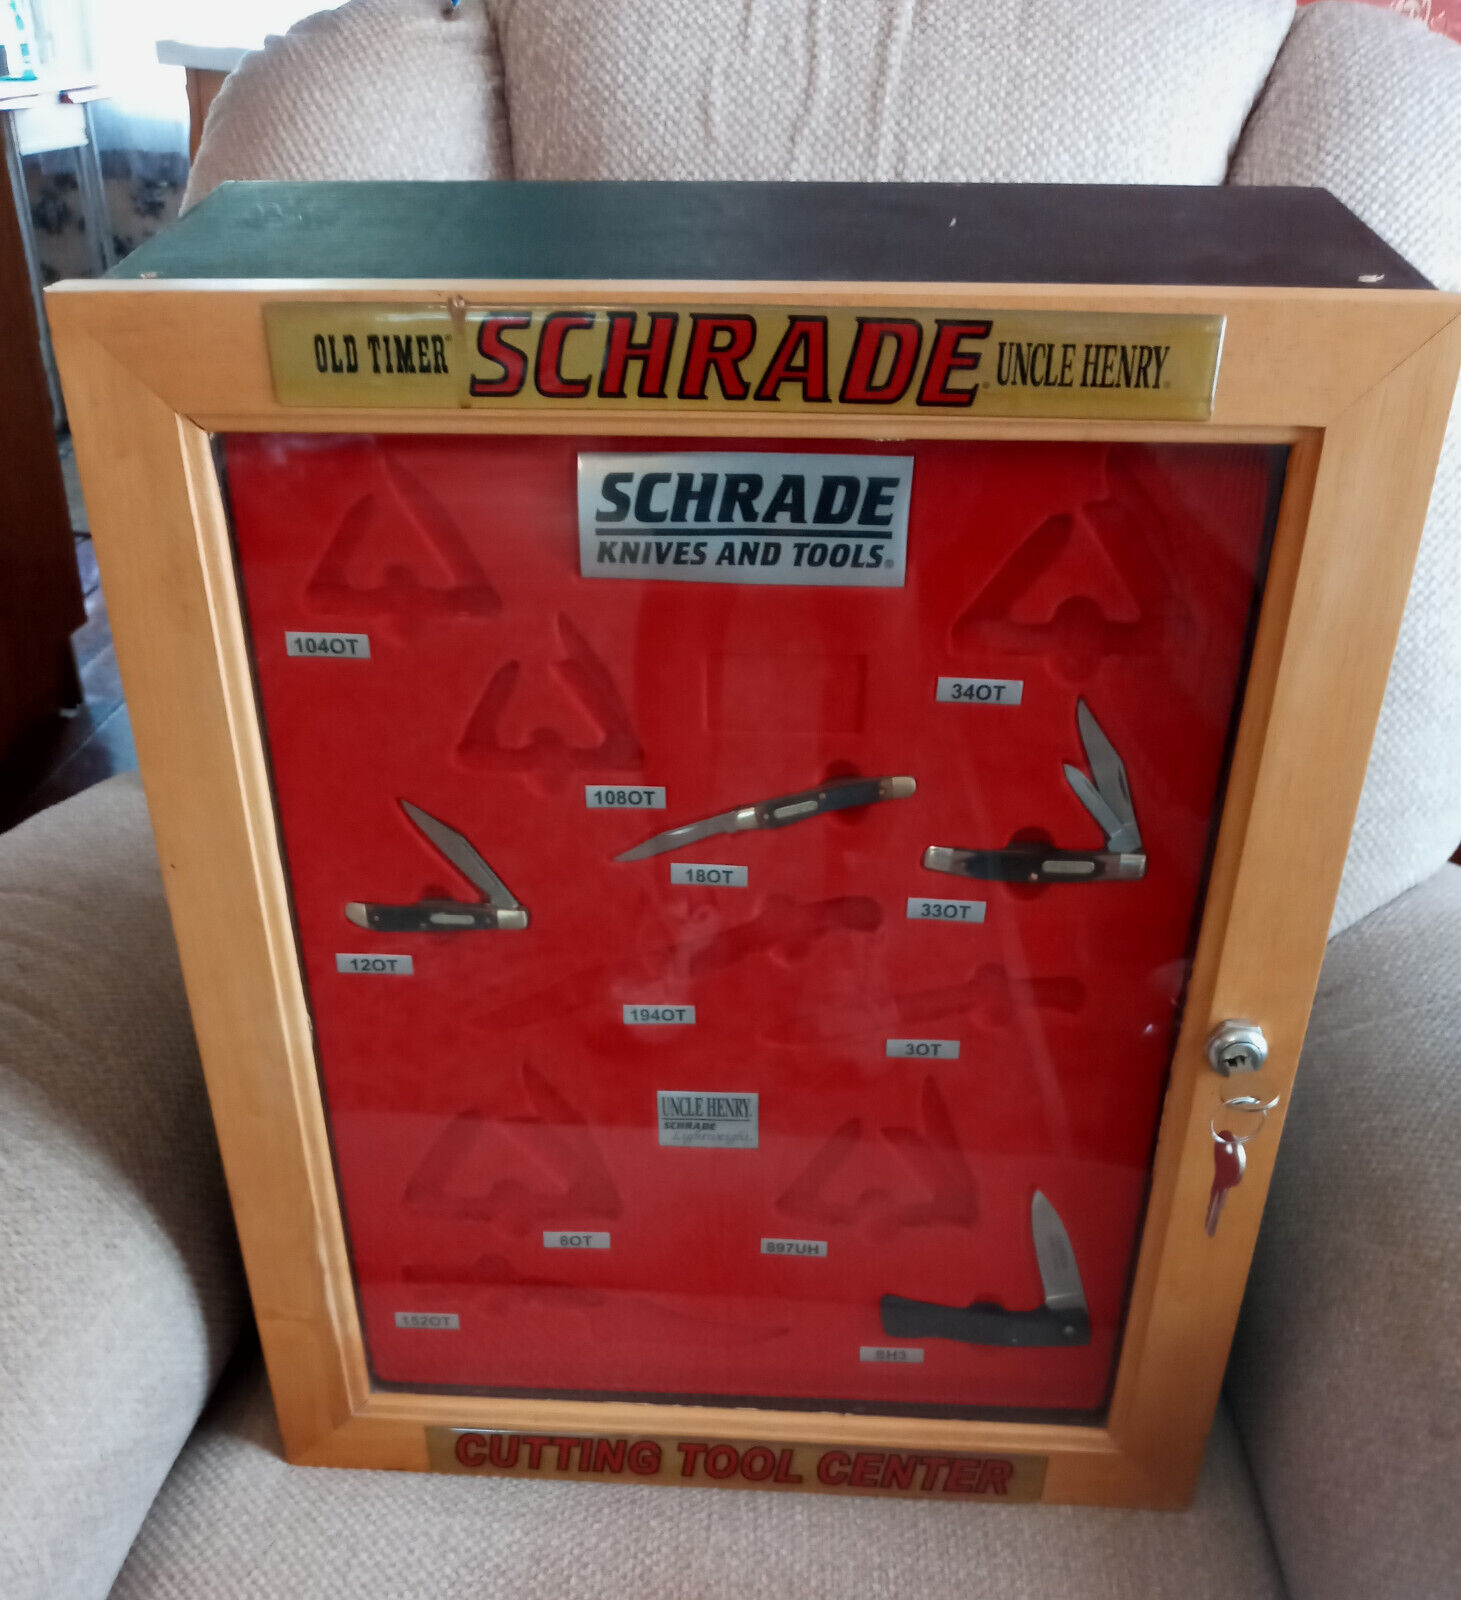 VTG SCHRADE OLD TIMER UNCLE HENRY STORE COUNTER  DISPLAY with KEYS and BOXES